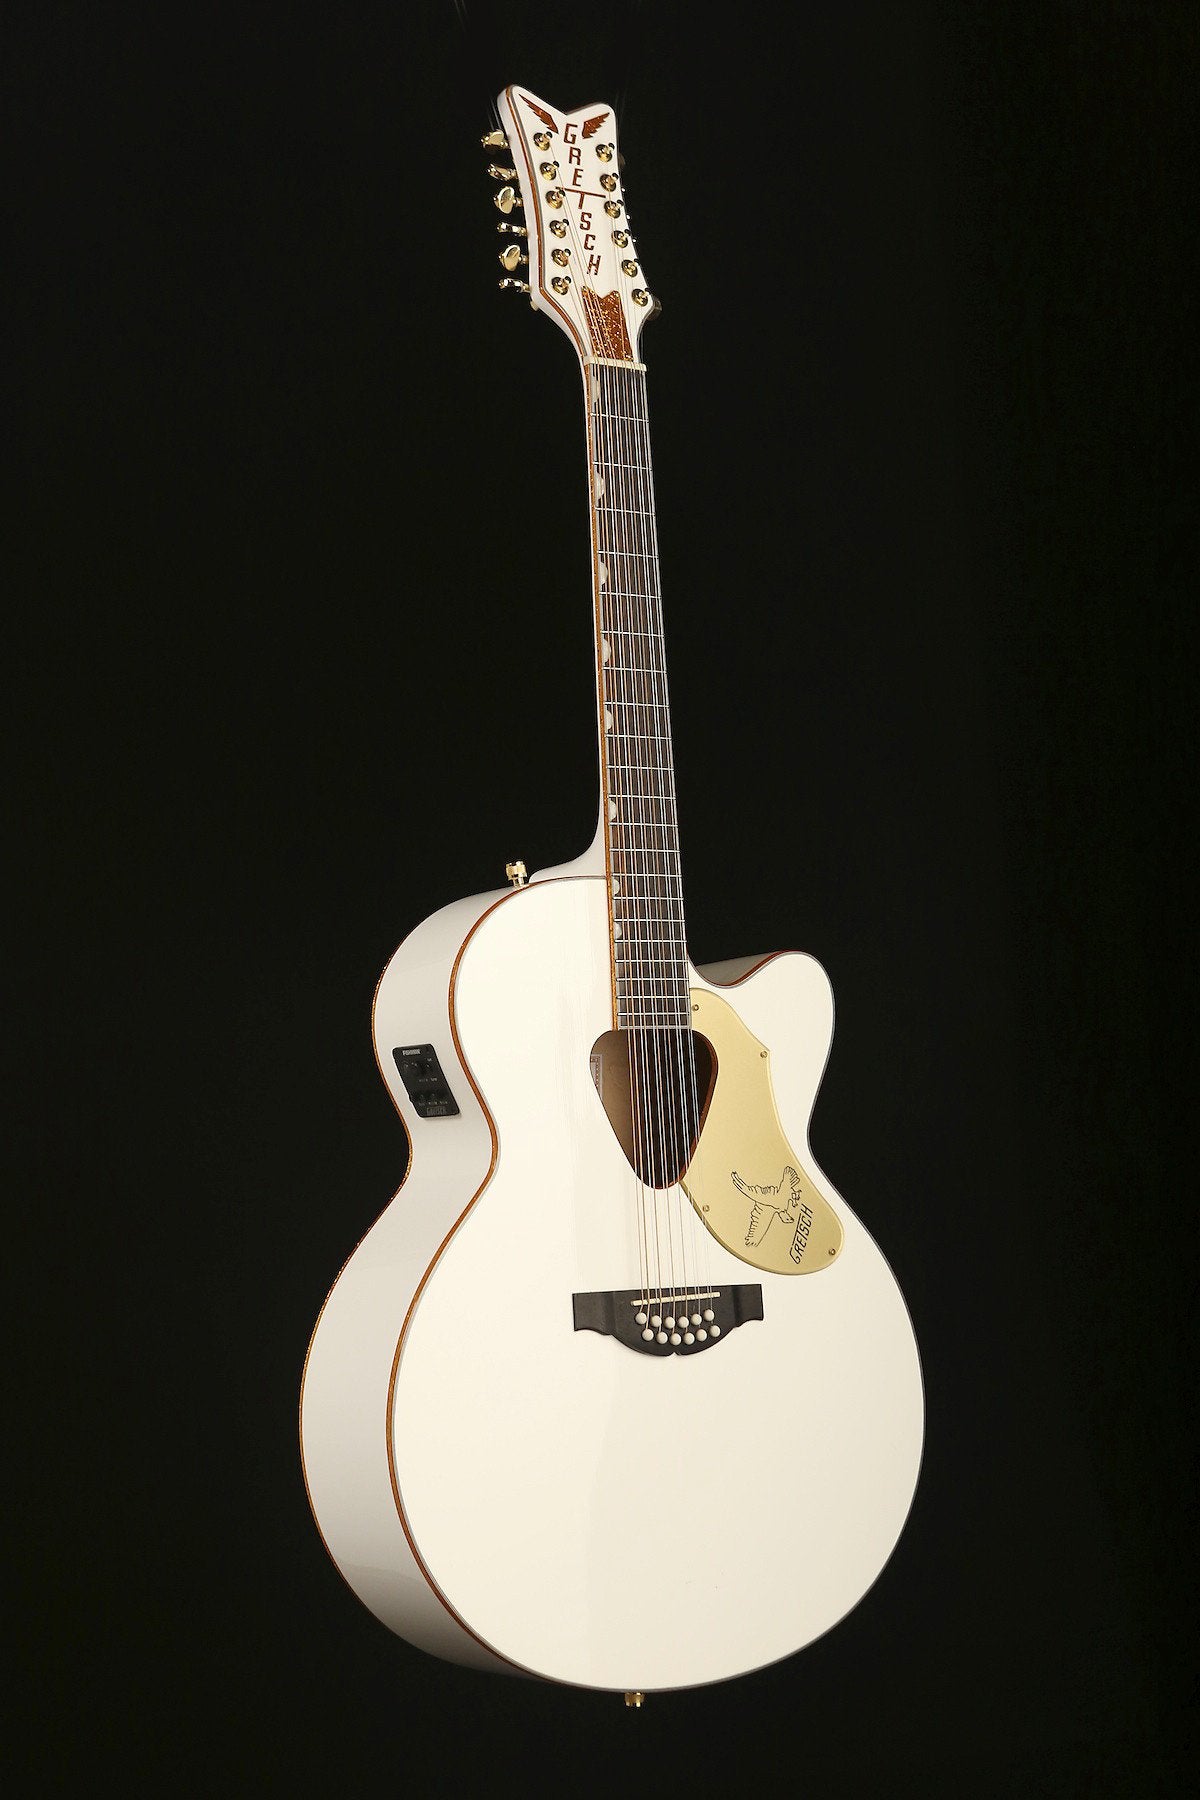 Gretsch Rancher White Falcon 12-String Acoustic Guitar - Acoustic